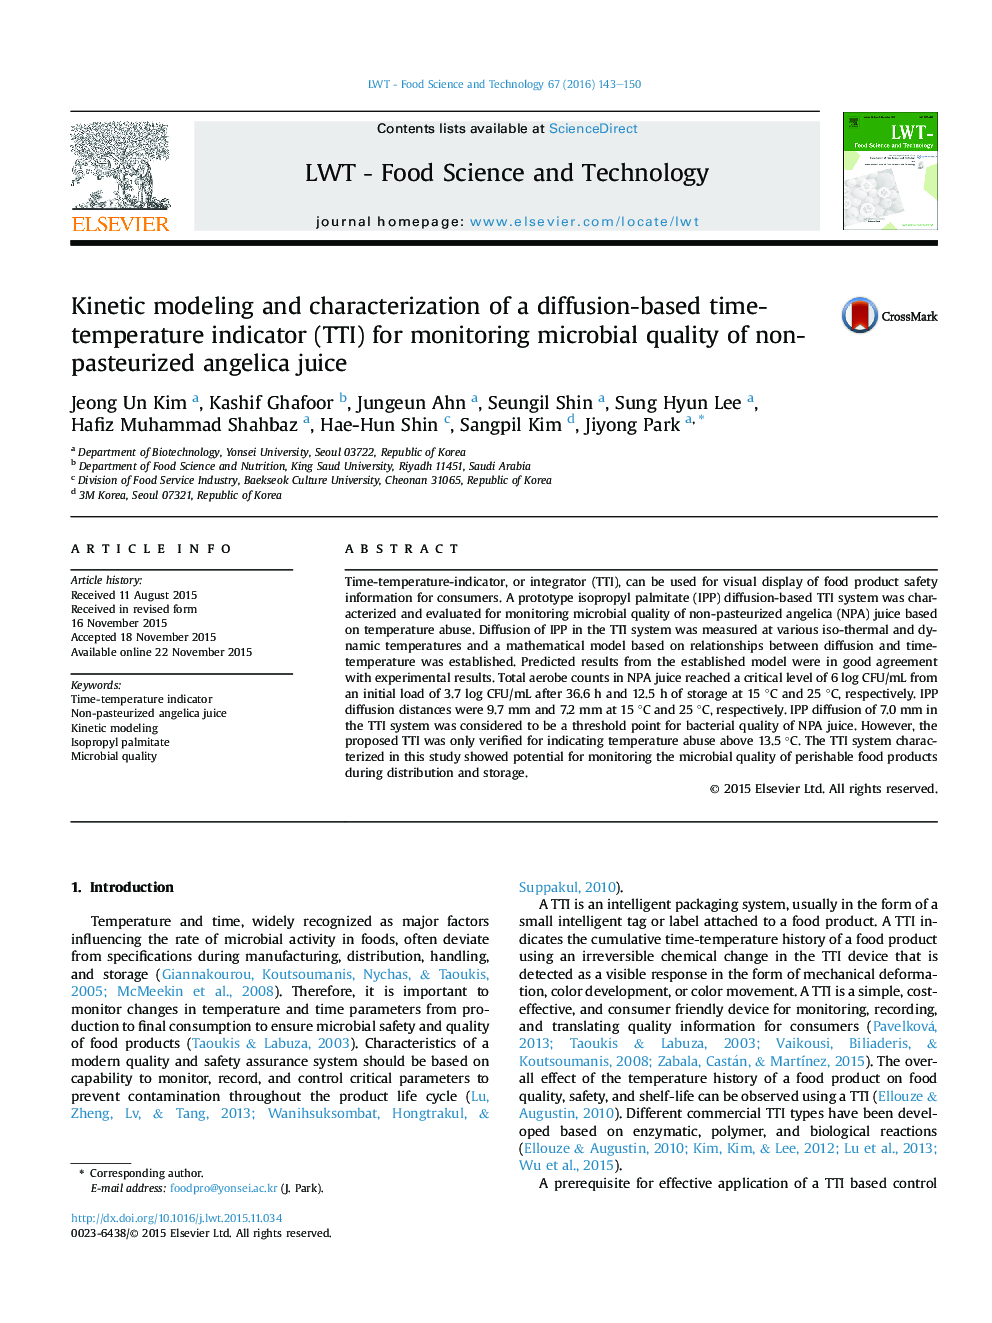 Kinetic modeling and characterization of a diffusion-based time-temperature indicator (TTI) for monitoring microbial quality of non-pasteurized angelica juice